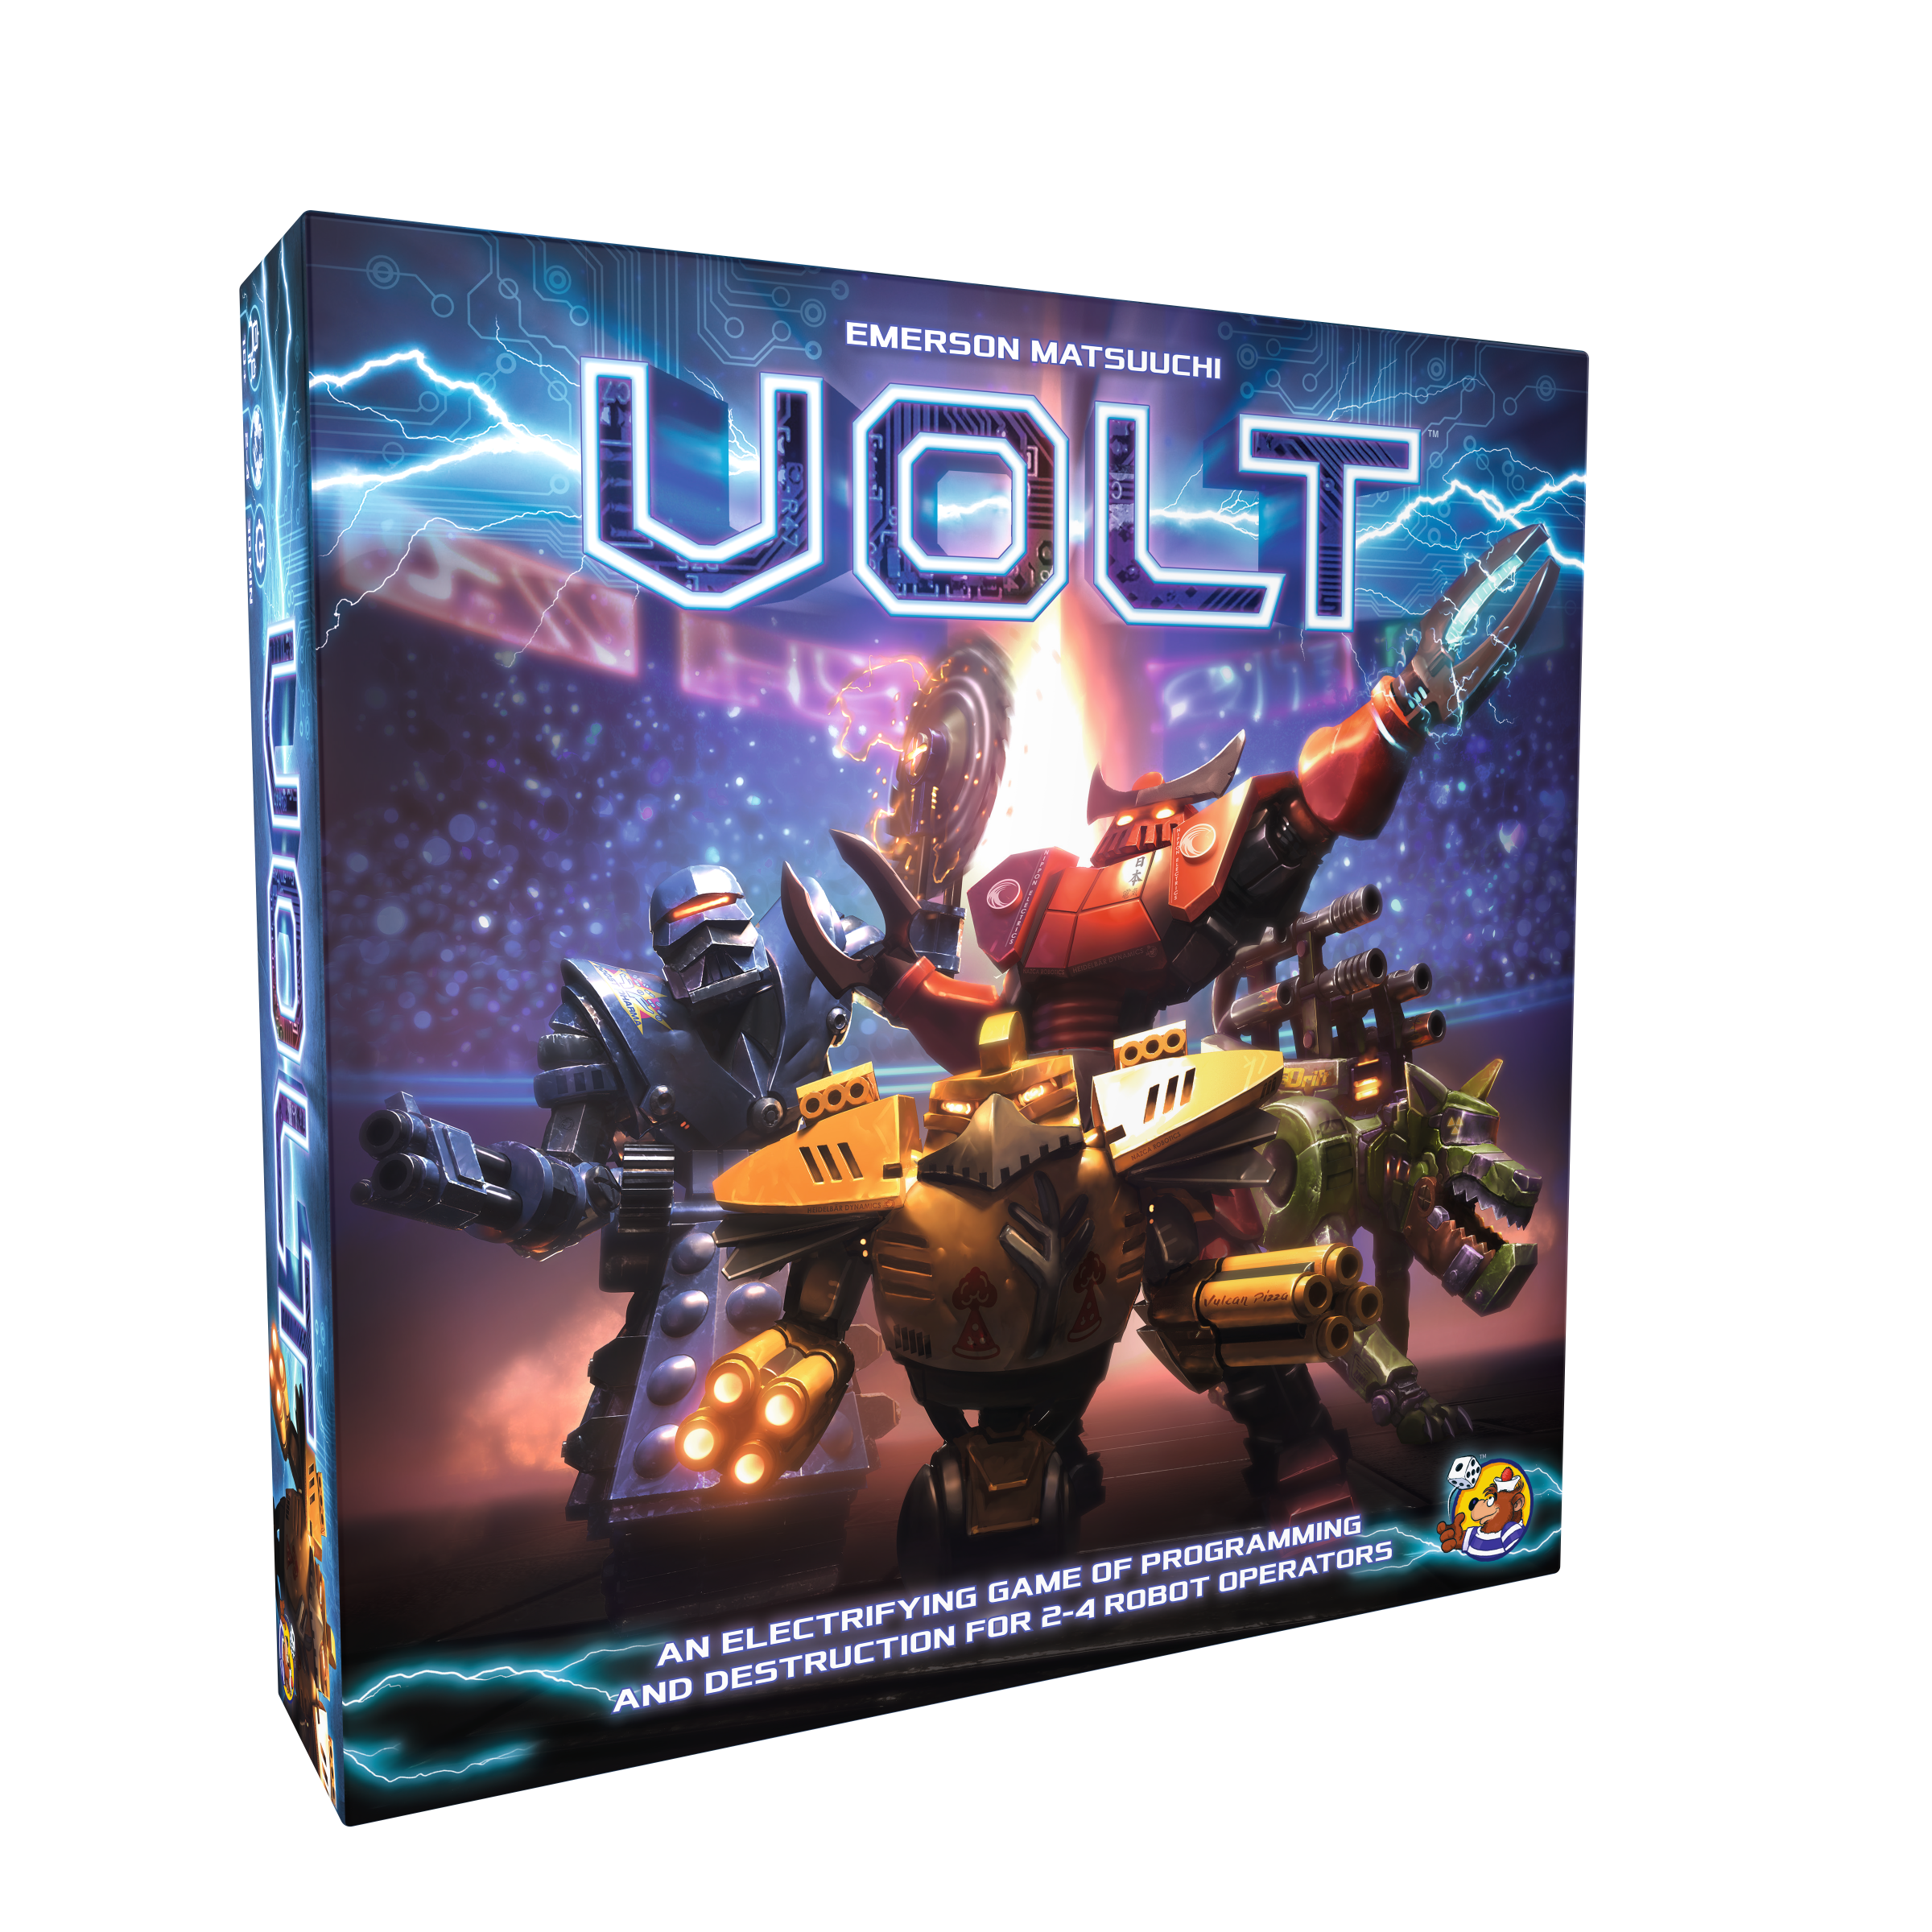 This is an image/link of the boardgame Volt